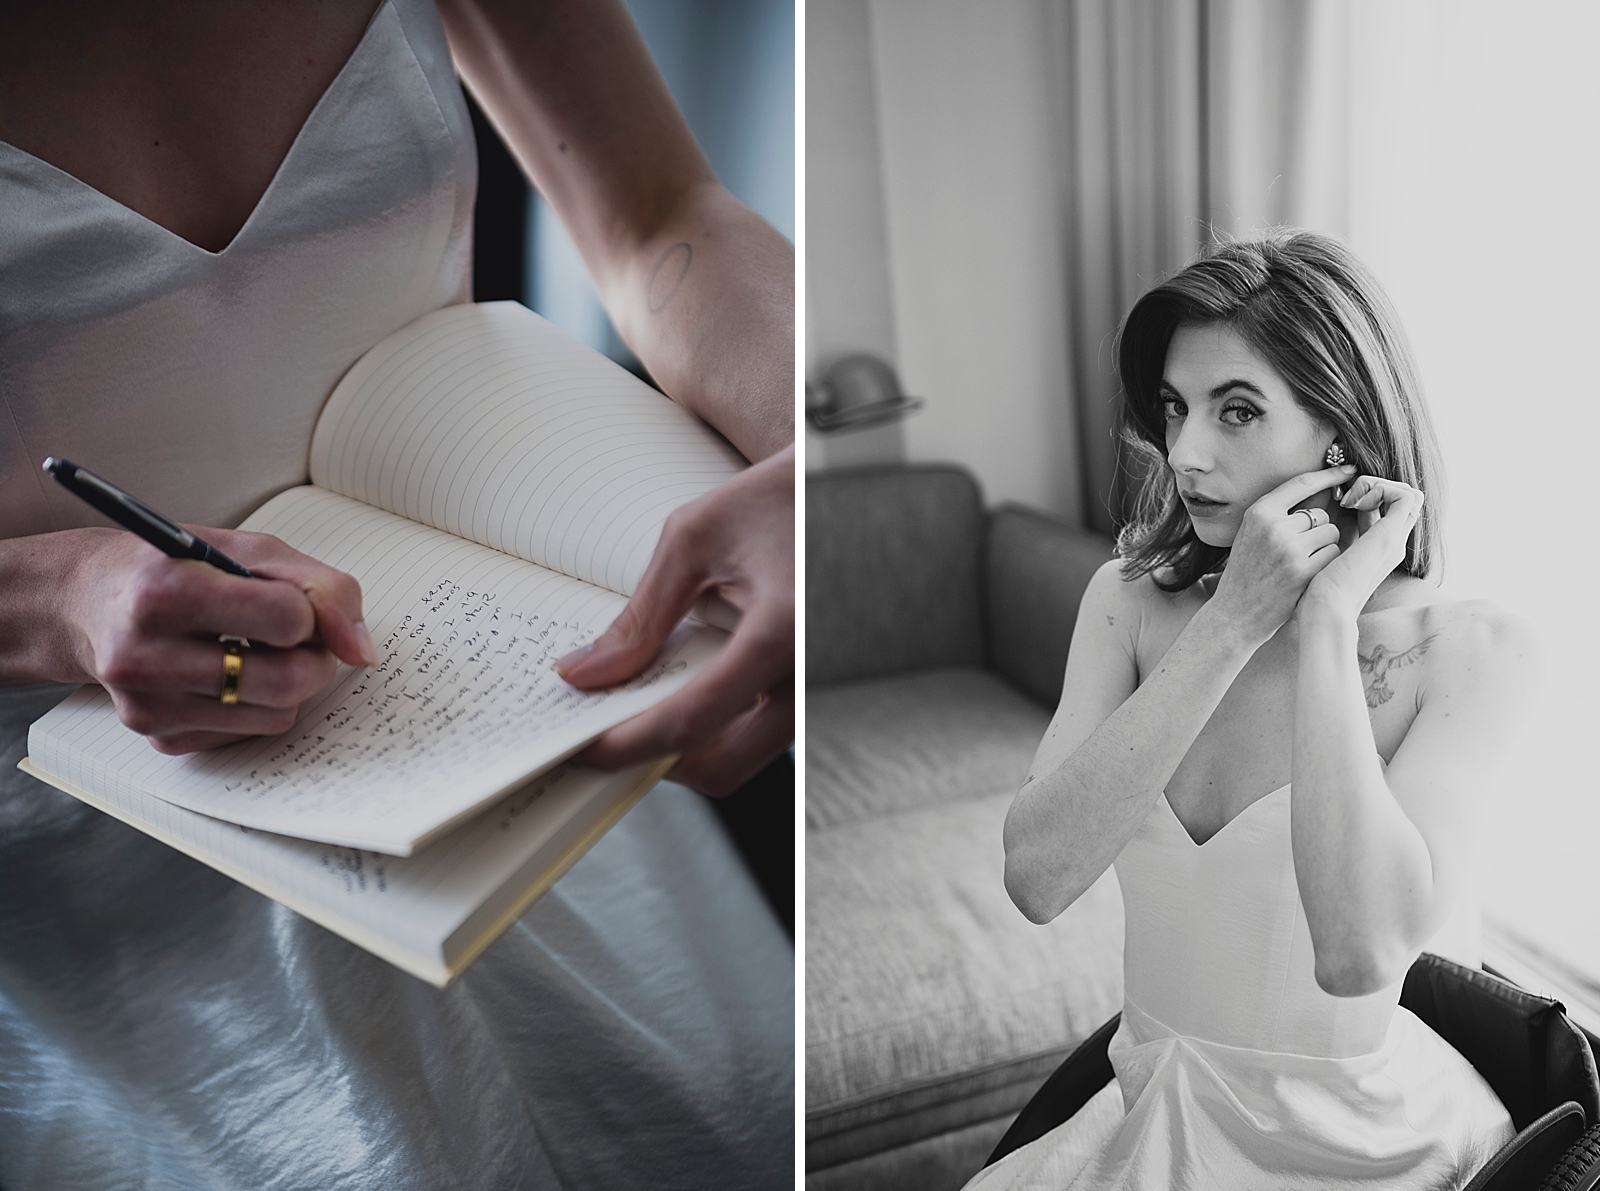 Left photo: Close up shot of the bride writing her vows down in a book.
Right photo: Upper body, black and white shot of the bride adjusting her earring. 